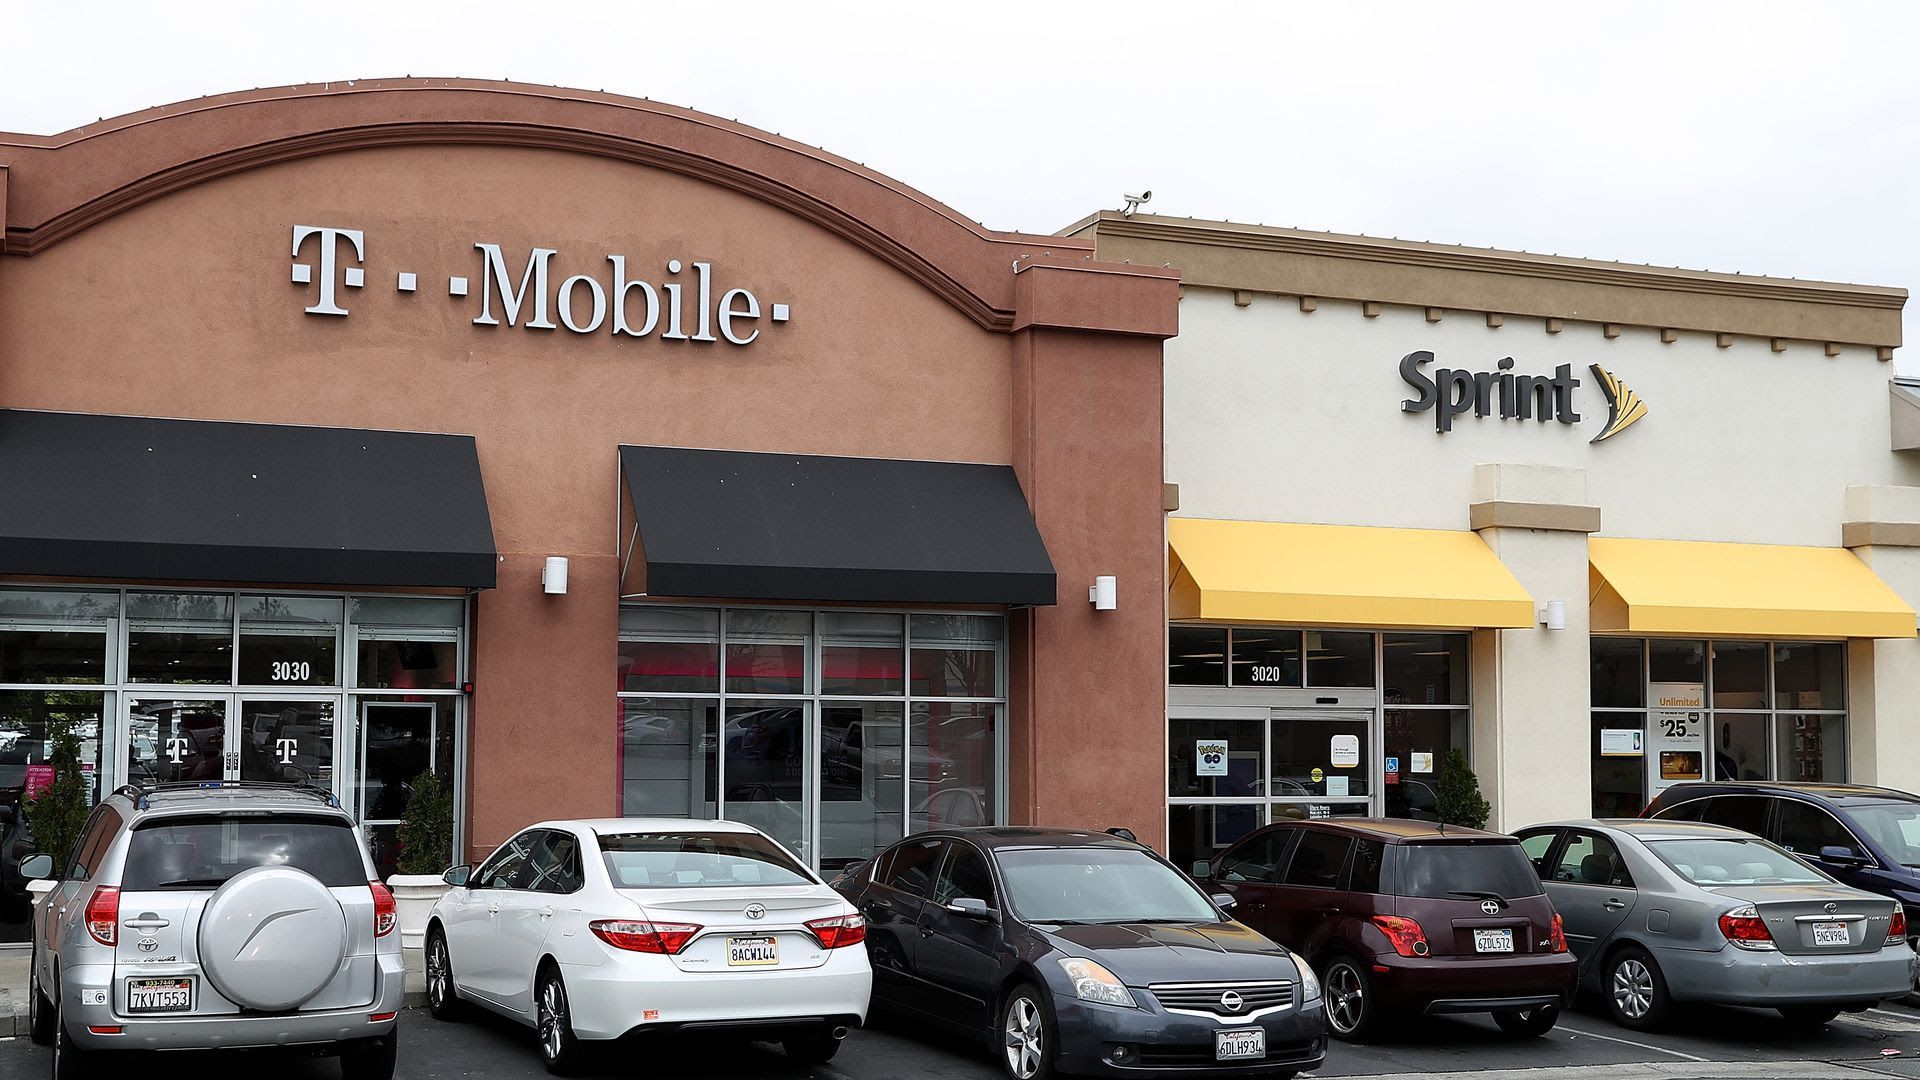 T-Mobile and Sprint storefronts